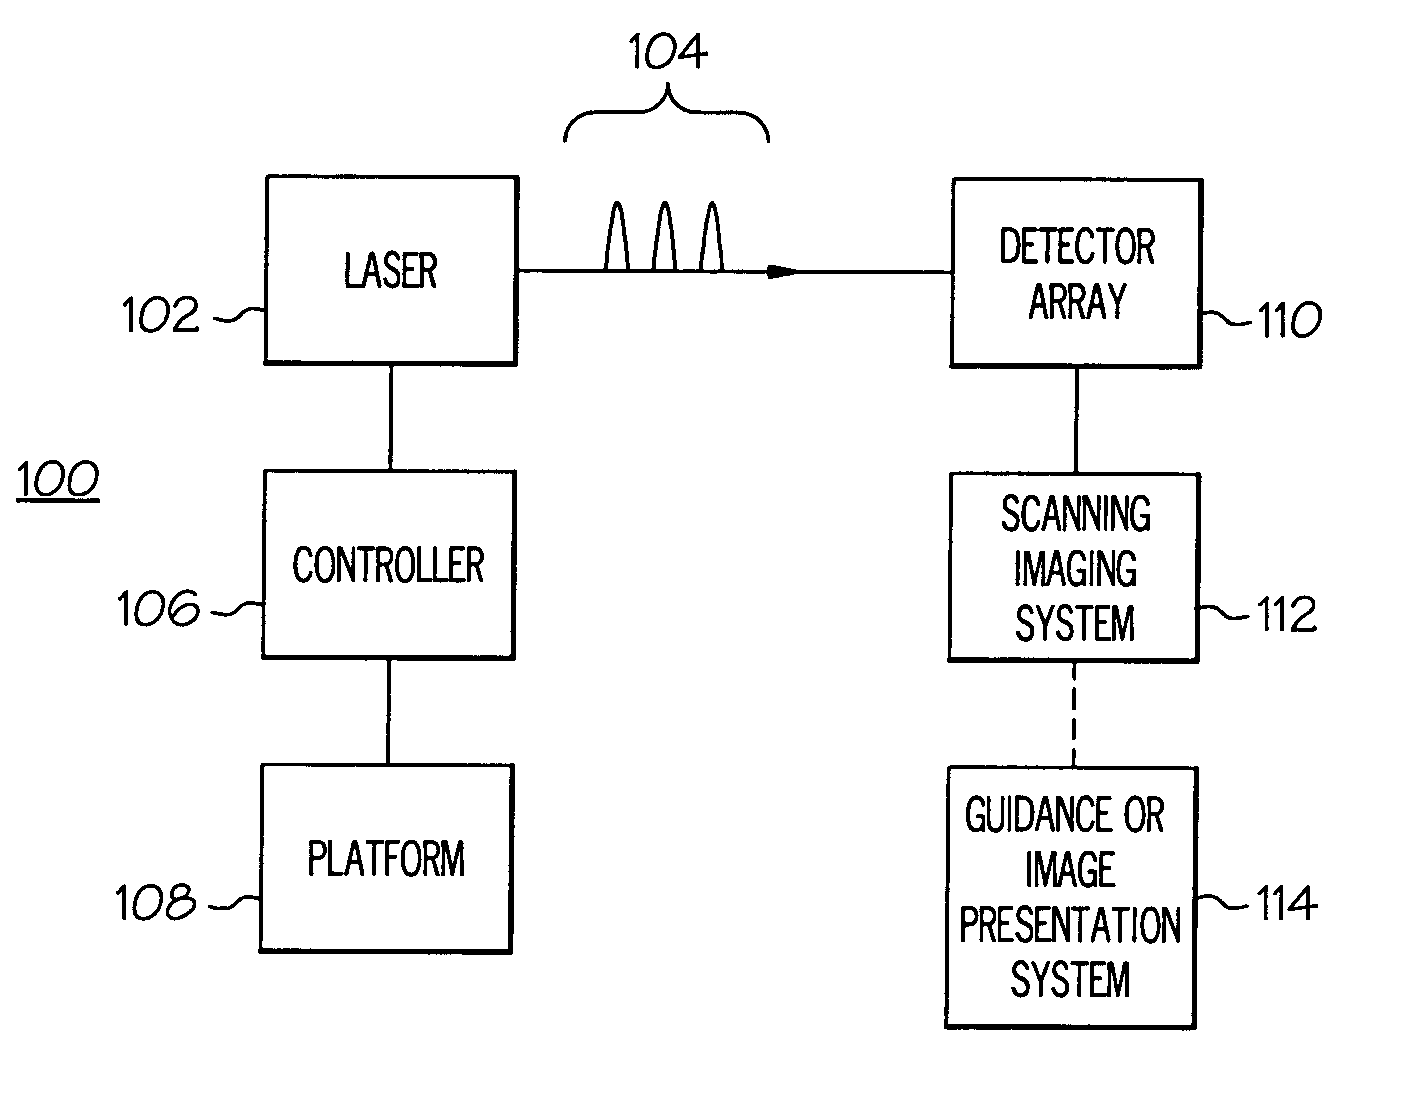 System and processes for causing the simultaneity of events including controlling a pulse repetition frequency of a pulsed laser for disabling a scanning imaging system